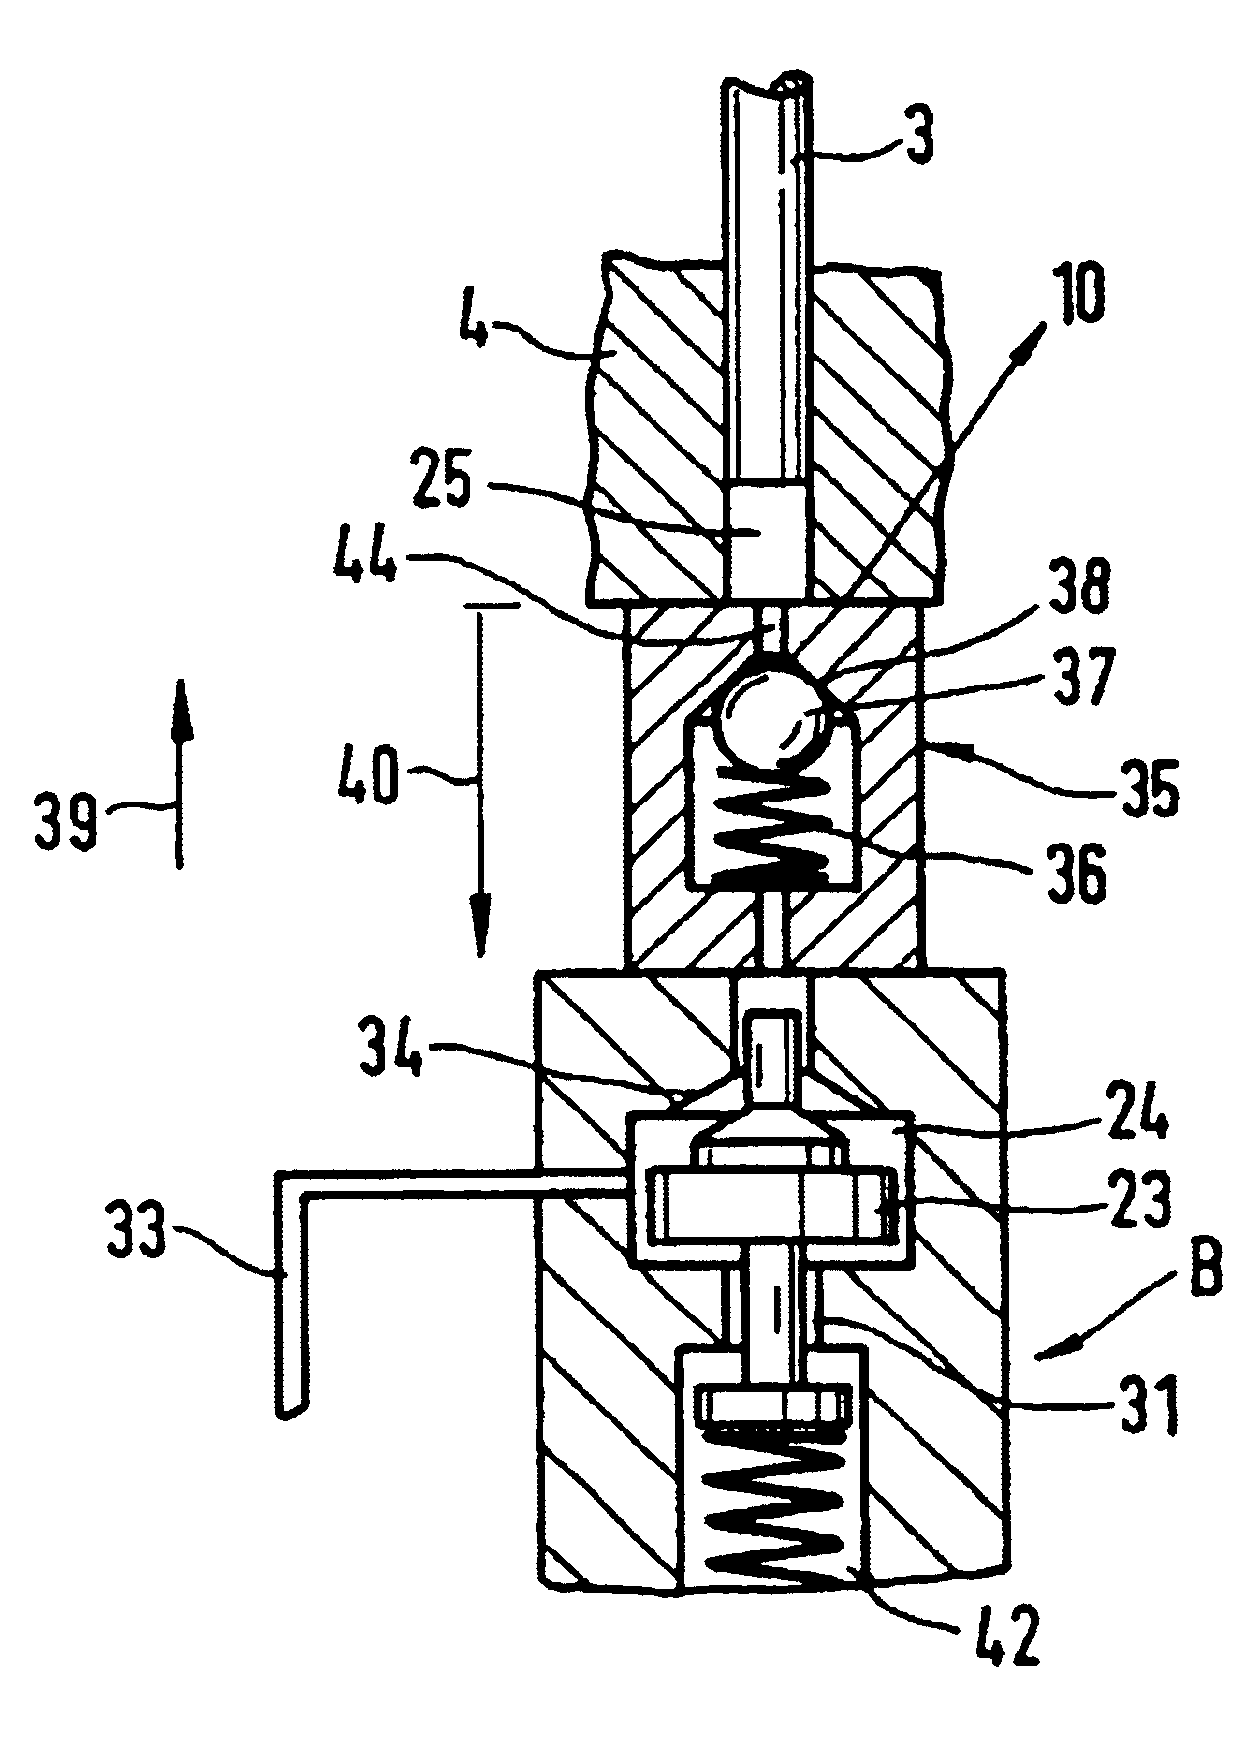 Noise-optimized device for injecting fuel